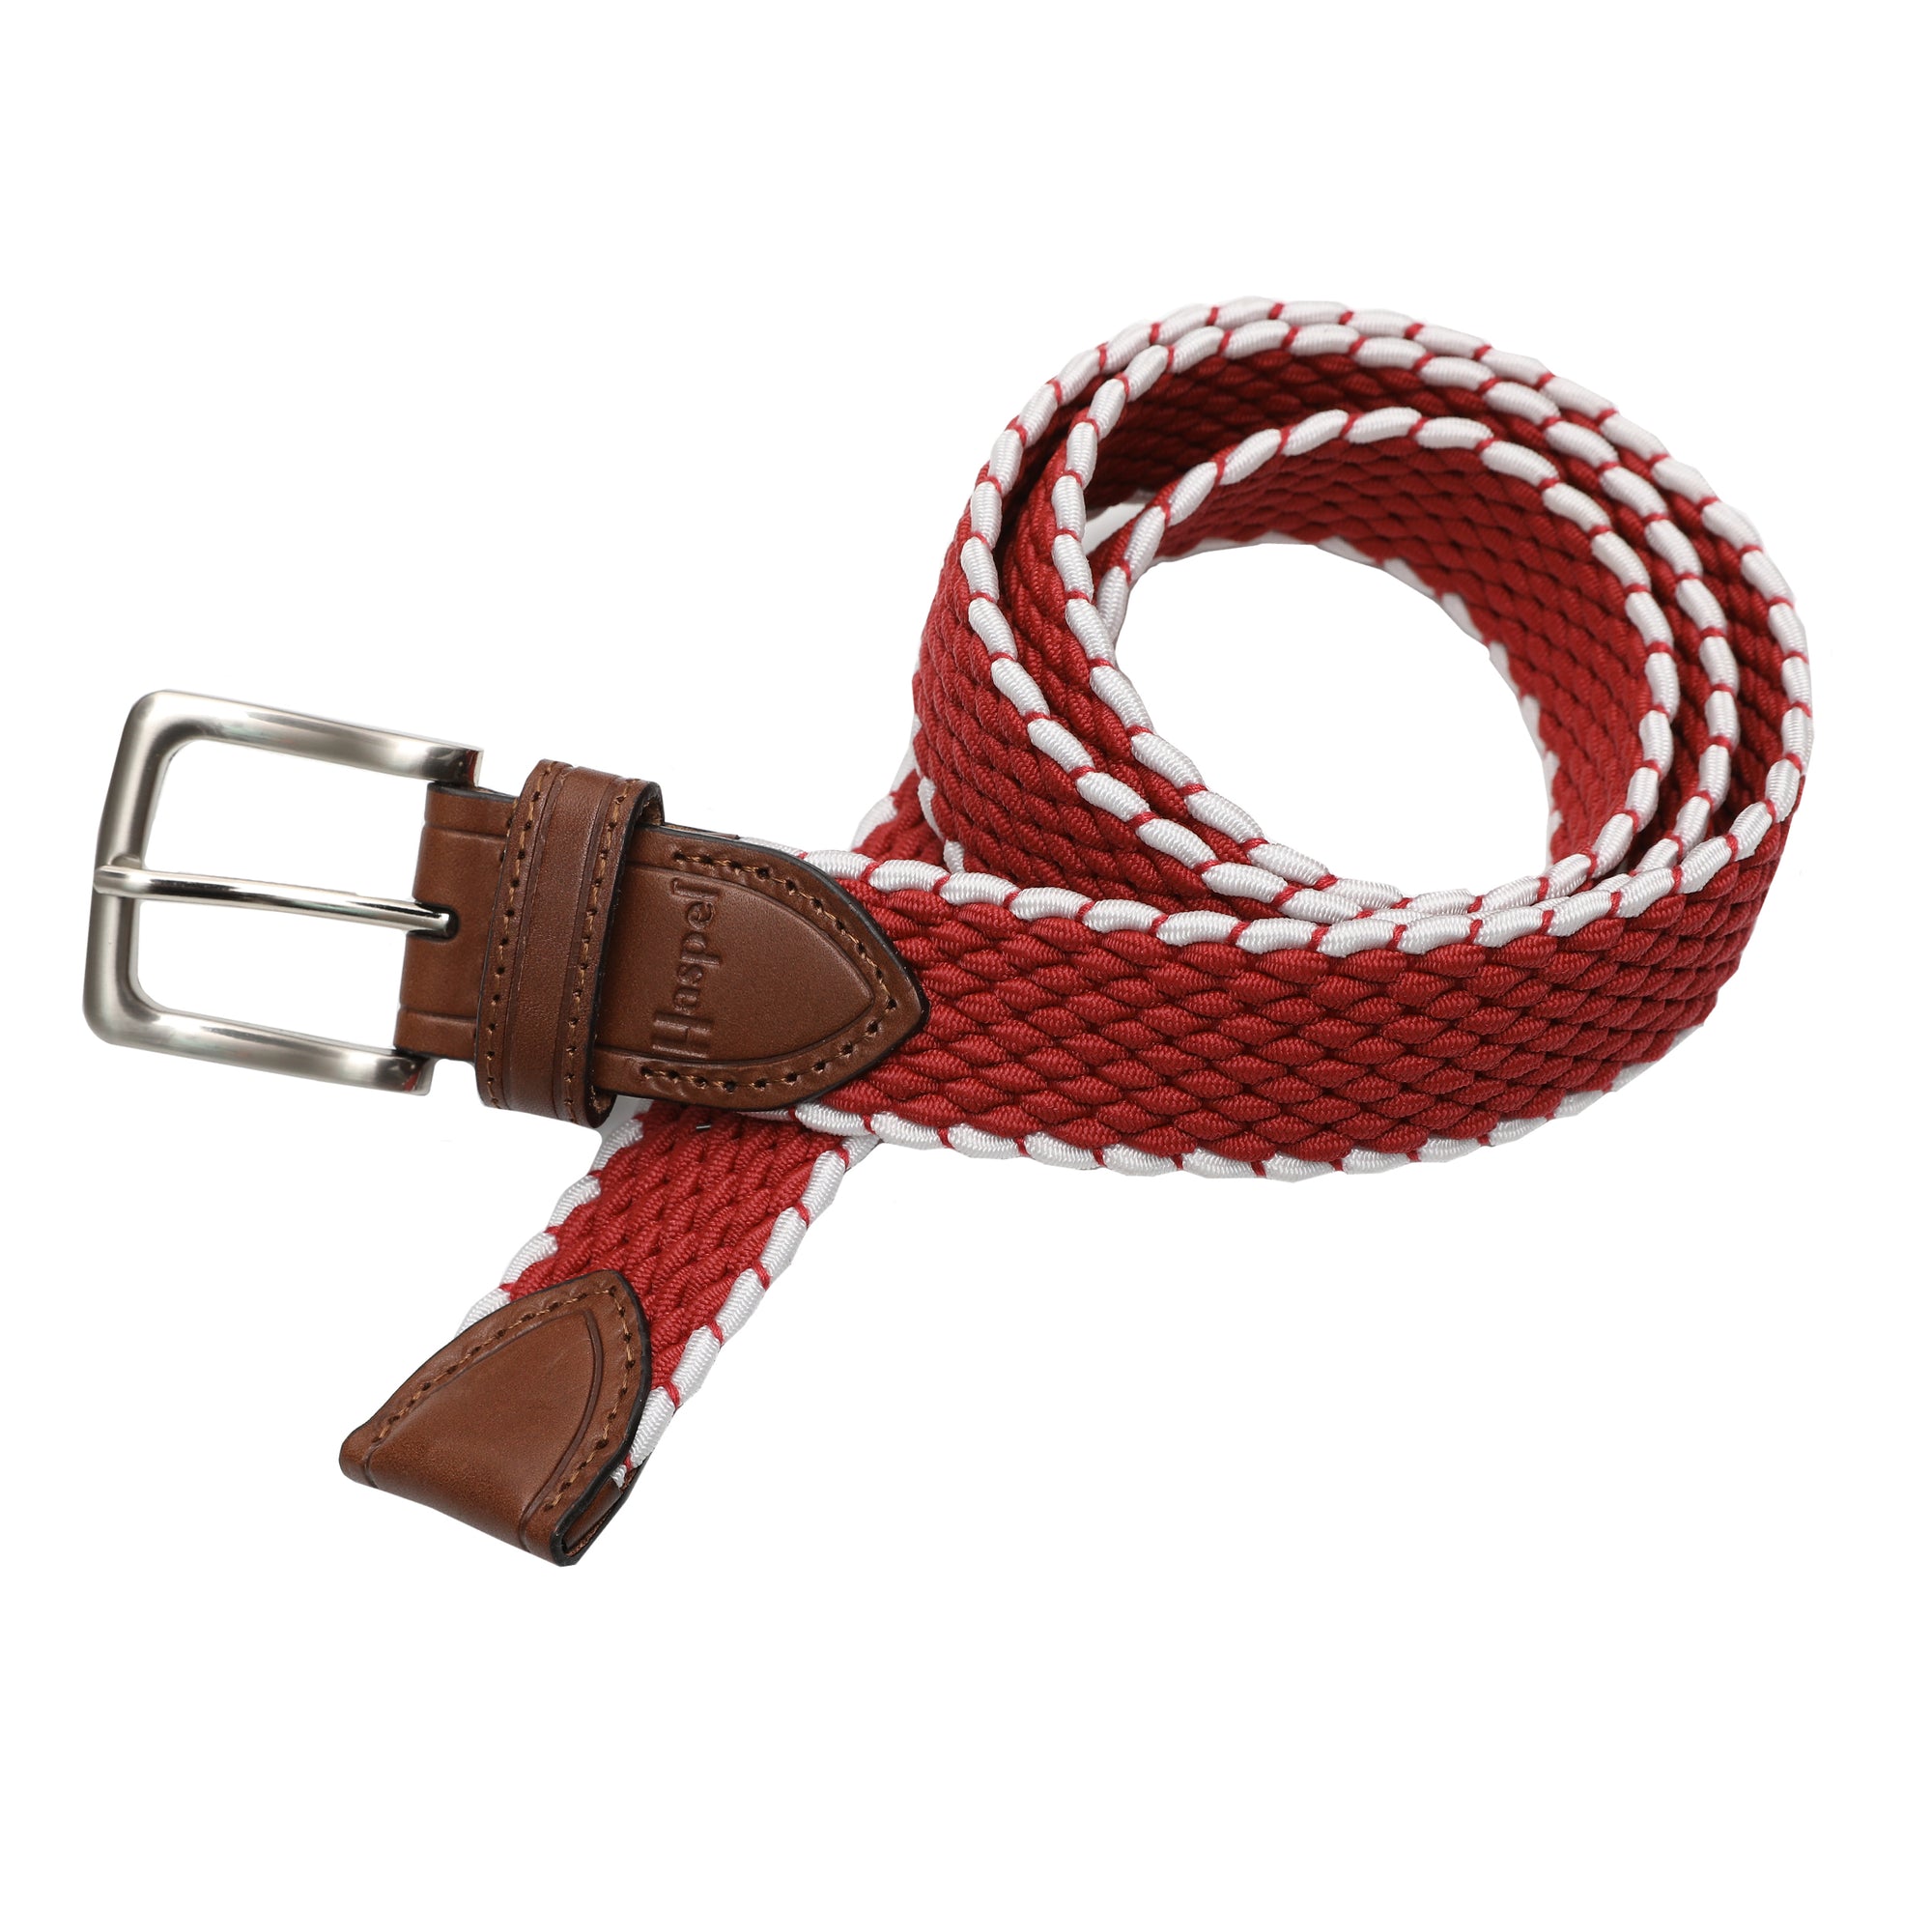 Crafted to add a rich style to any look, our elastic belts feature a leather tab, antique nickel finish buckle, and color choices to support our favorite collegiate teams.   Braided elastic • Briar Waxy Leather Points • 1-3/8" wide • Antique Nickel Finish Buckle • Imported • Always order belts one size above your natural waist size. • Return Policy